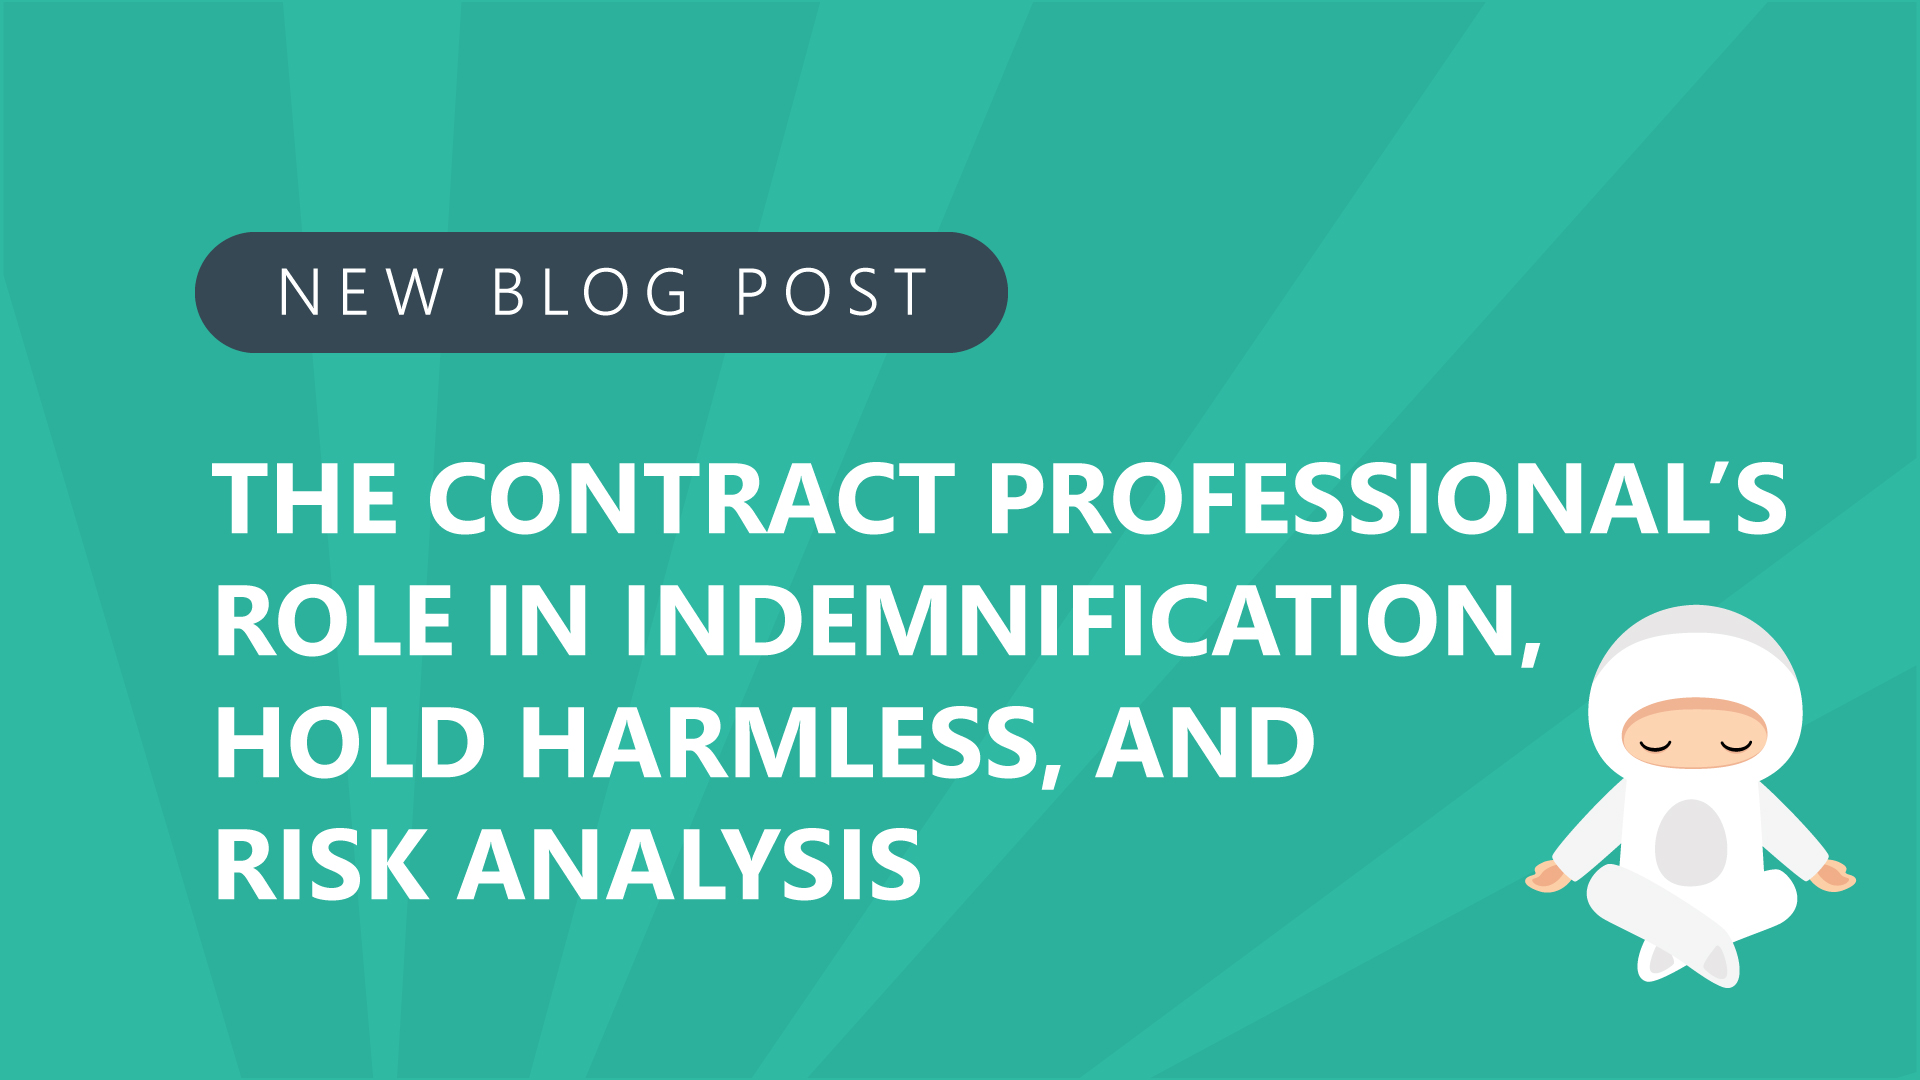 3-The-Contract-Professionals-Role-In-Indemnification-Hold-Harmless-and-Risk-Analysis.jpg